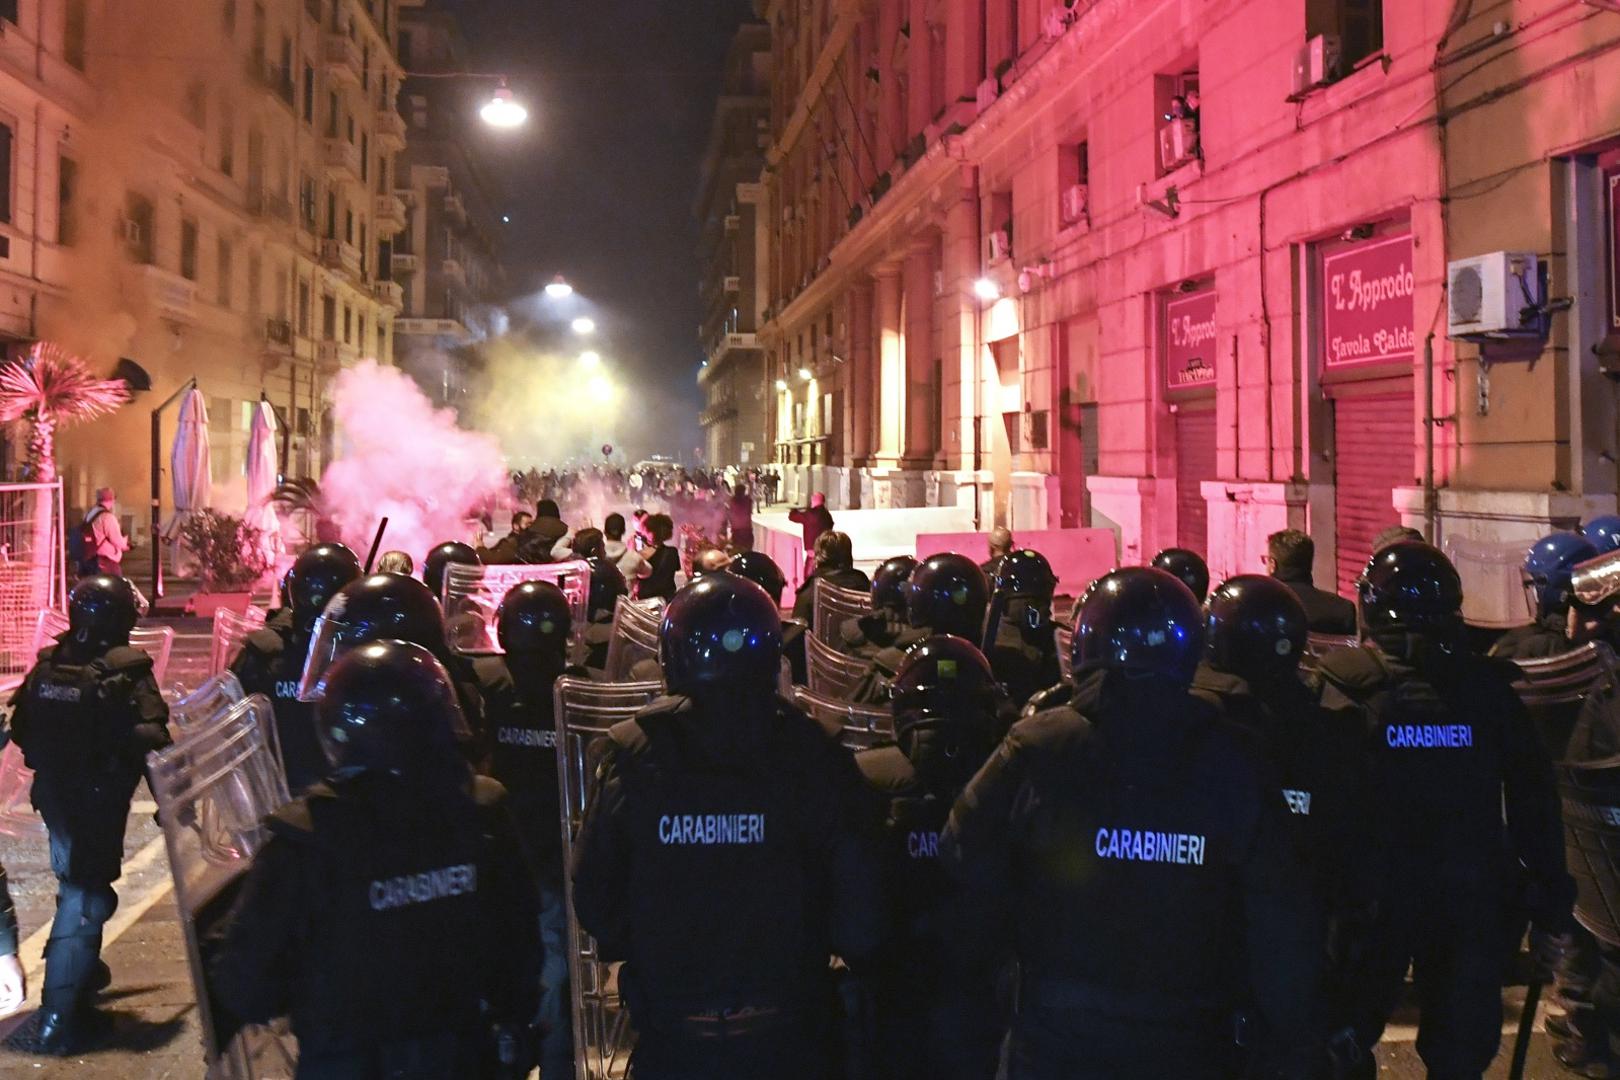 Hundreds of people clash against police during the protest over the curfew and the prospect of lockdown in Naples. The governor of Campania ordered from 23 October, a curfew from 11 pm till morning due to spike in coronavirus infections in the region /IPA/PIXSELLPhoto: IPA/PIXSELL